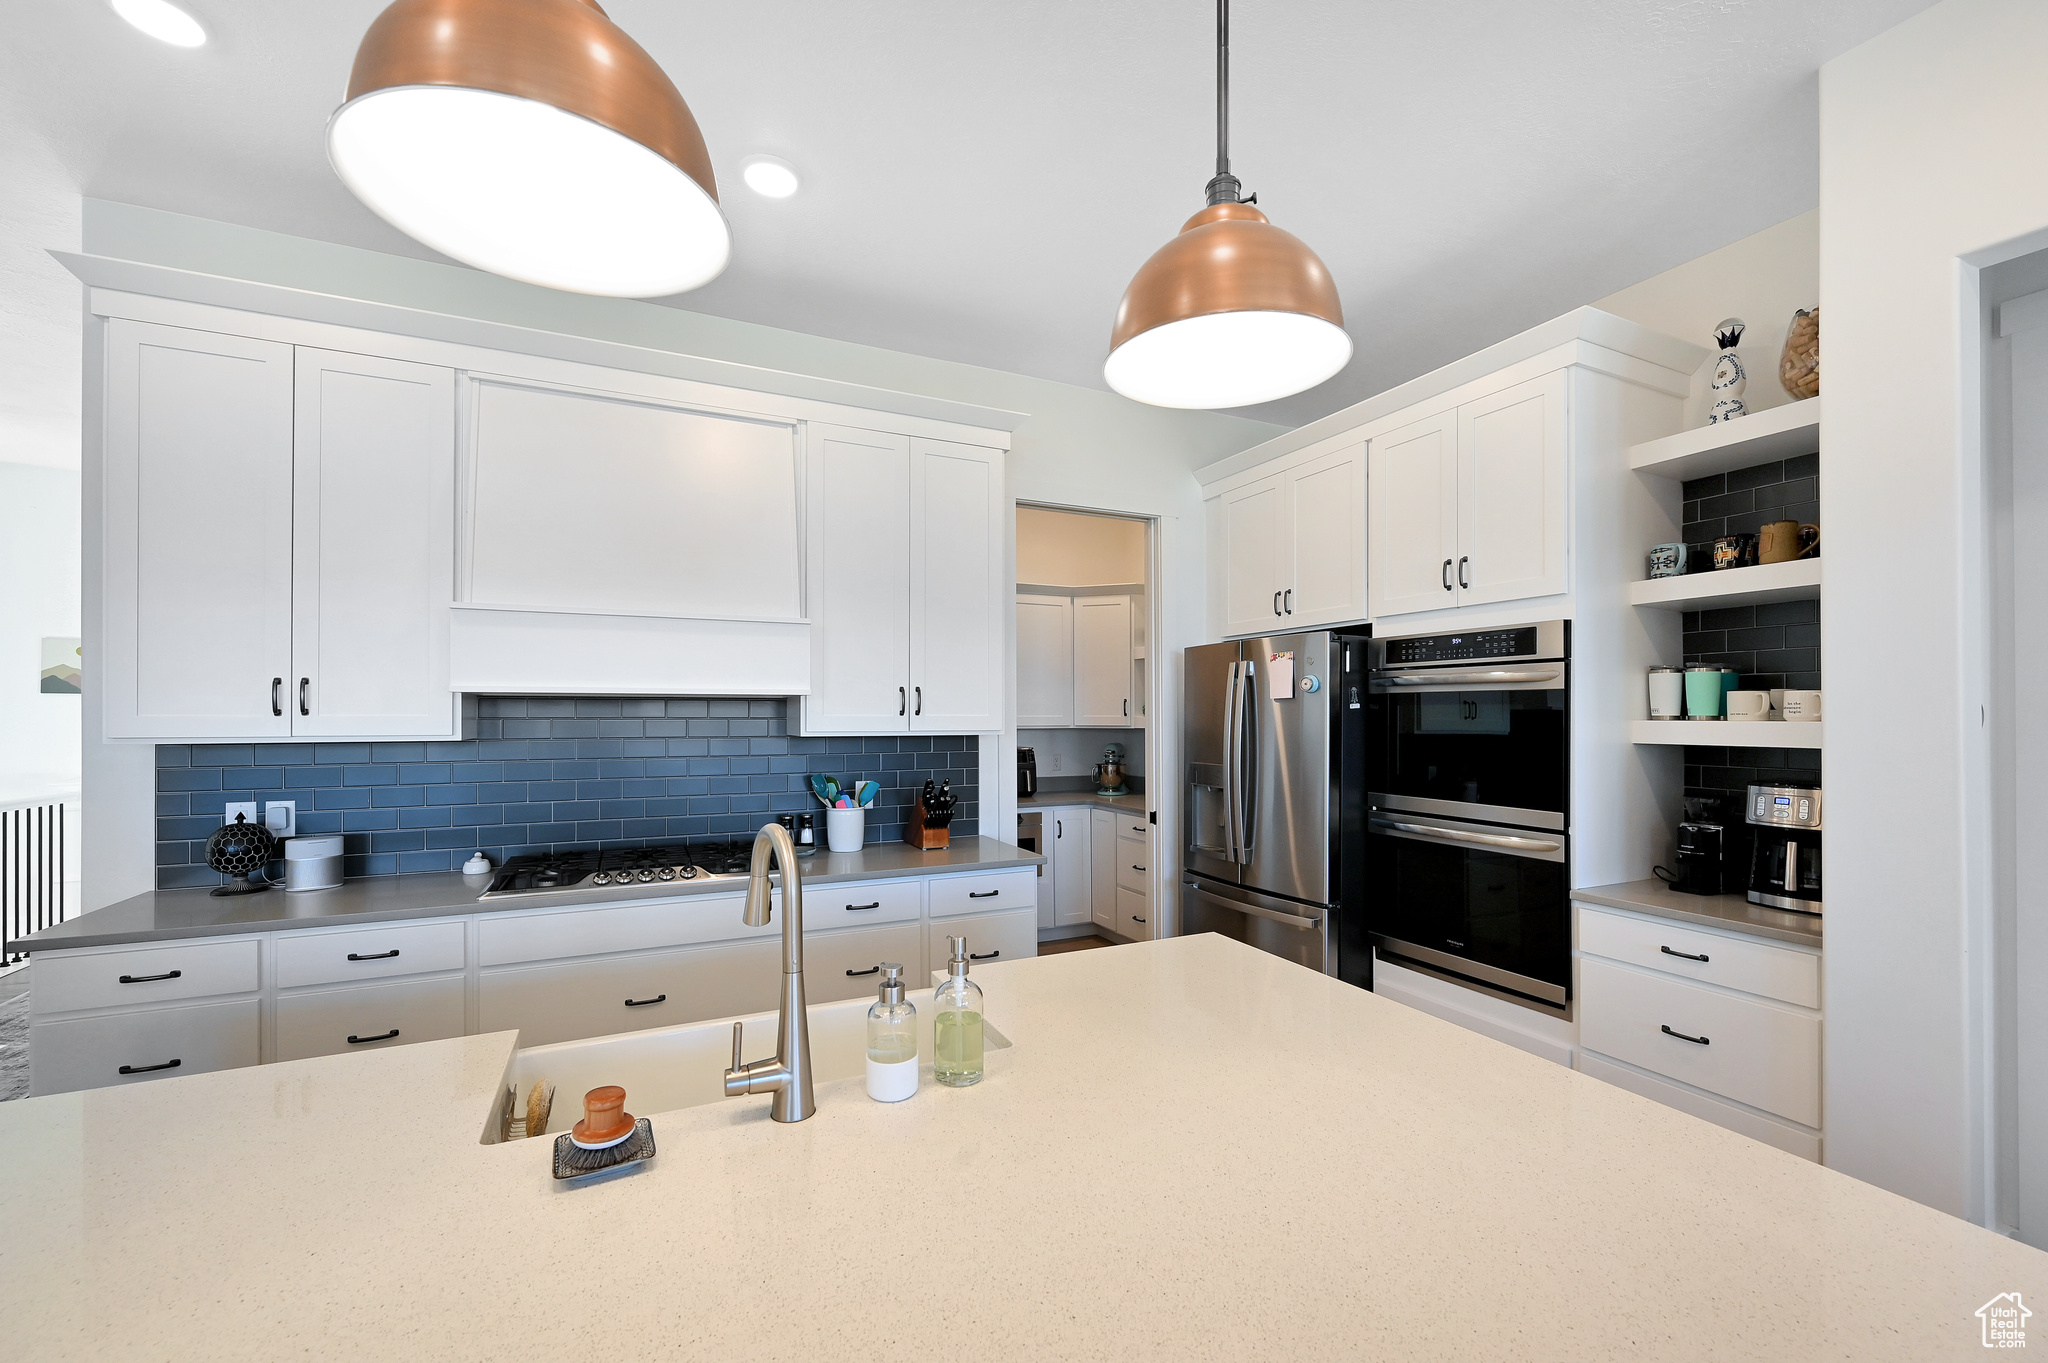 Kitchen with decorative light fixtures, backsplash, stainless steel appliances, white cabinetry, and sink